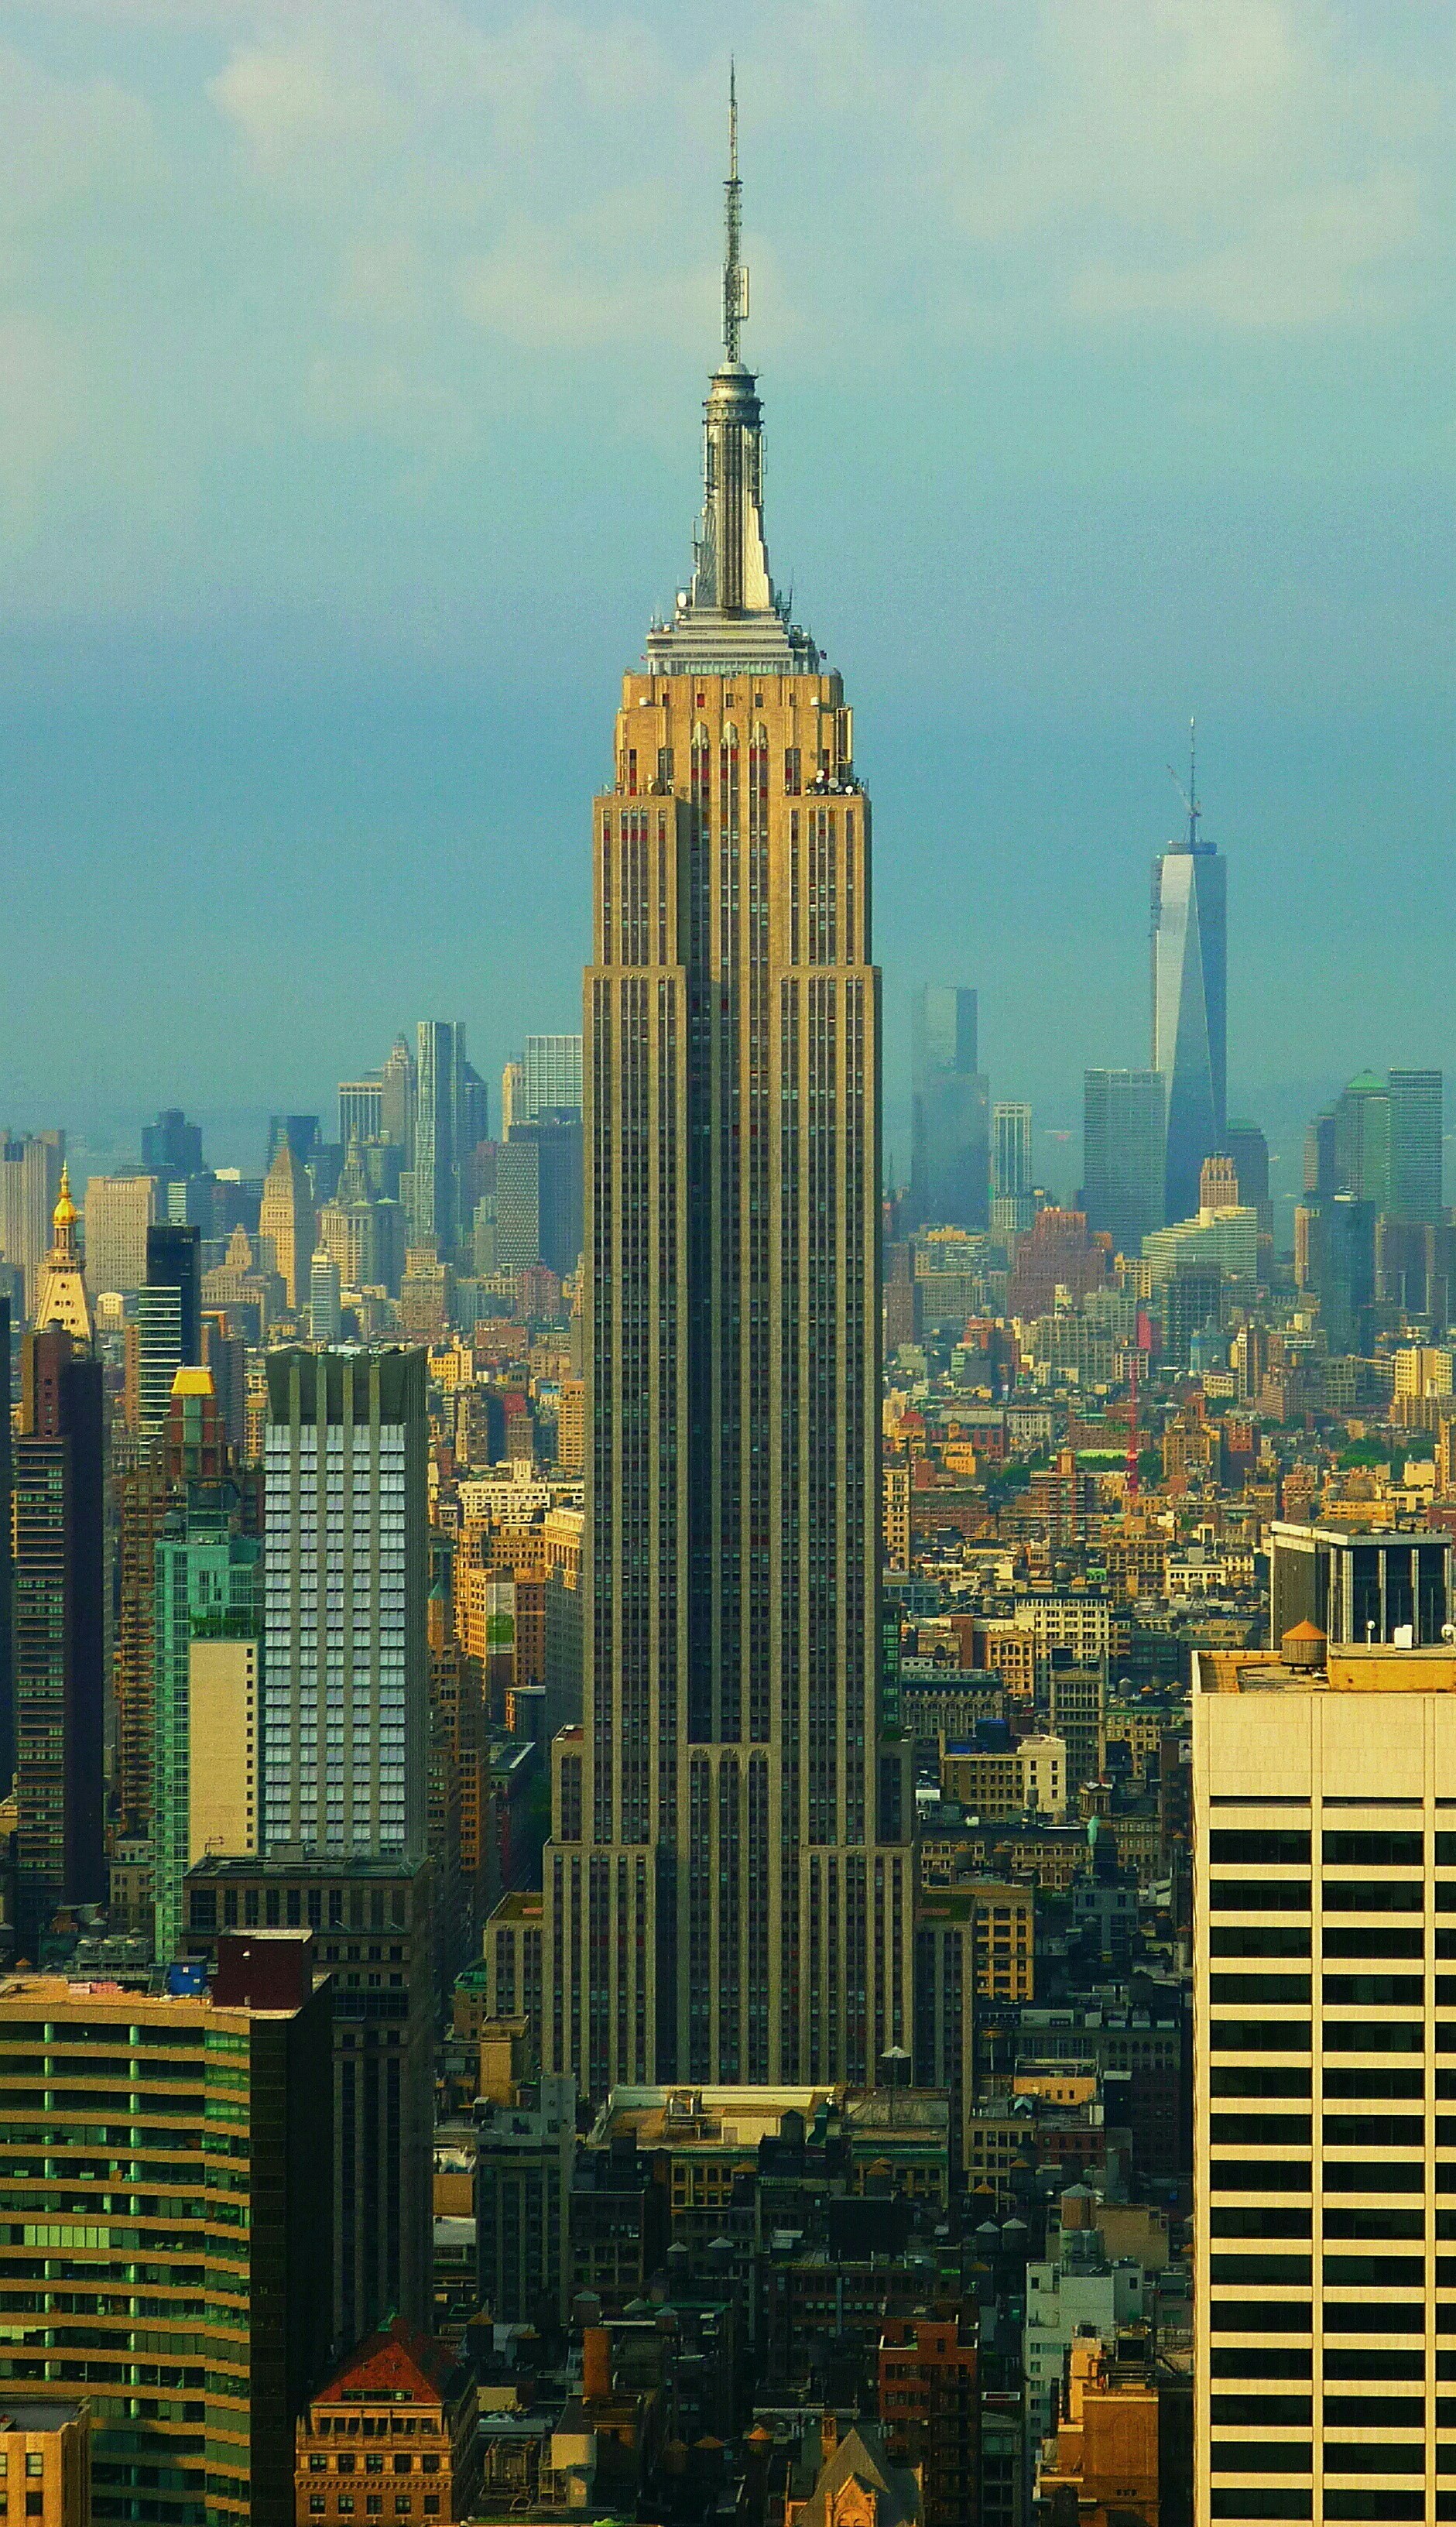 General 1881x3264 New York City Empire State Building One World Trade Center cityscape USA